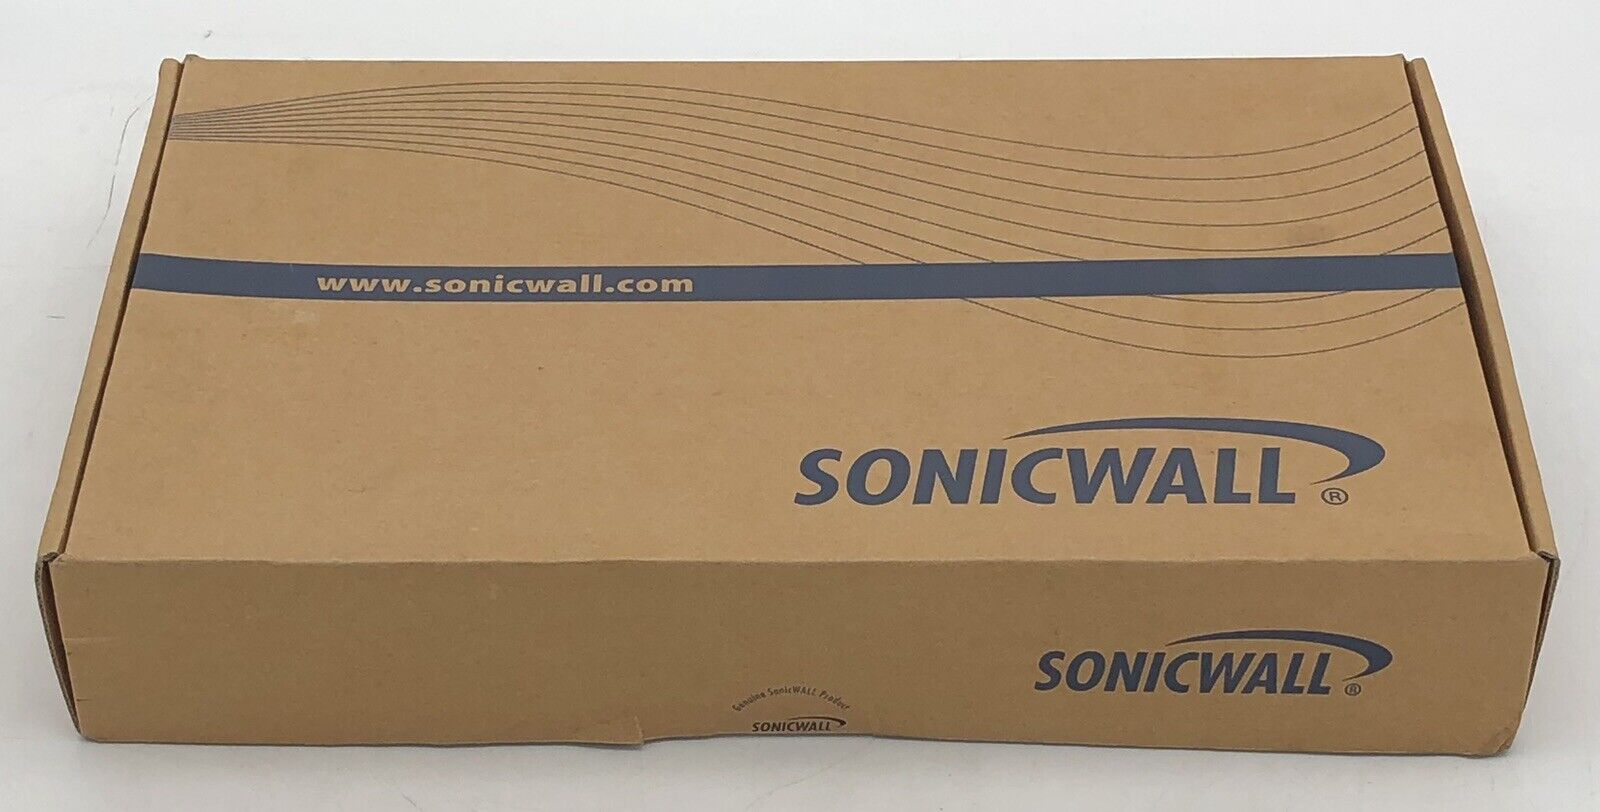 New SonicWall TZ 210 Total Secure Network Security Appliance 01-SSC-8769